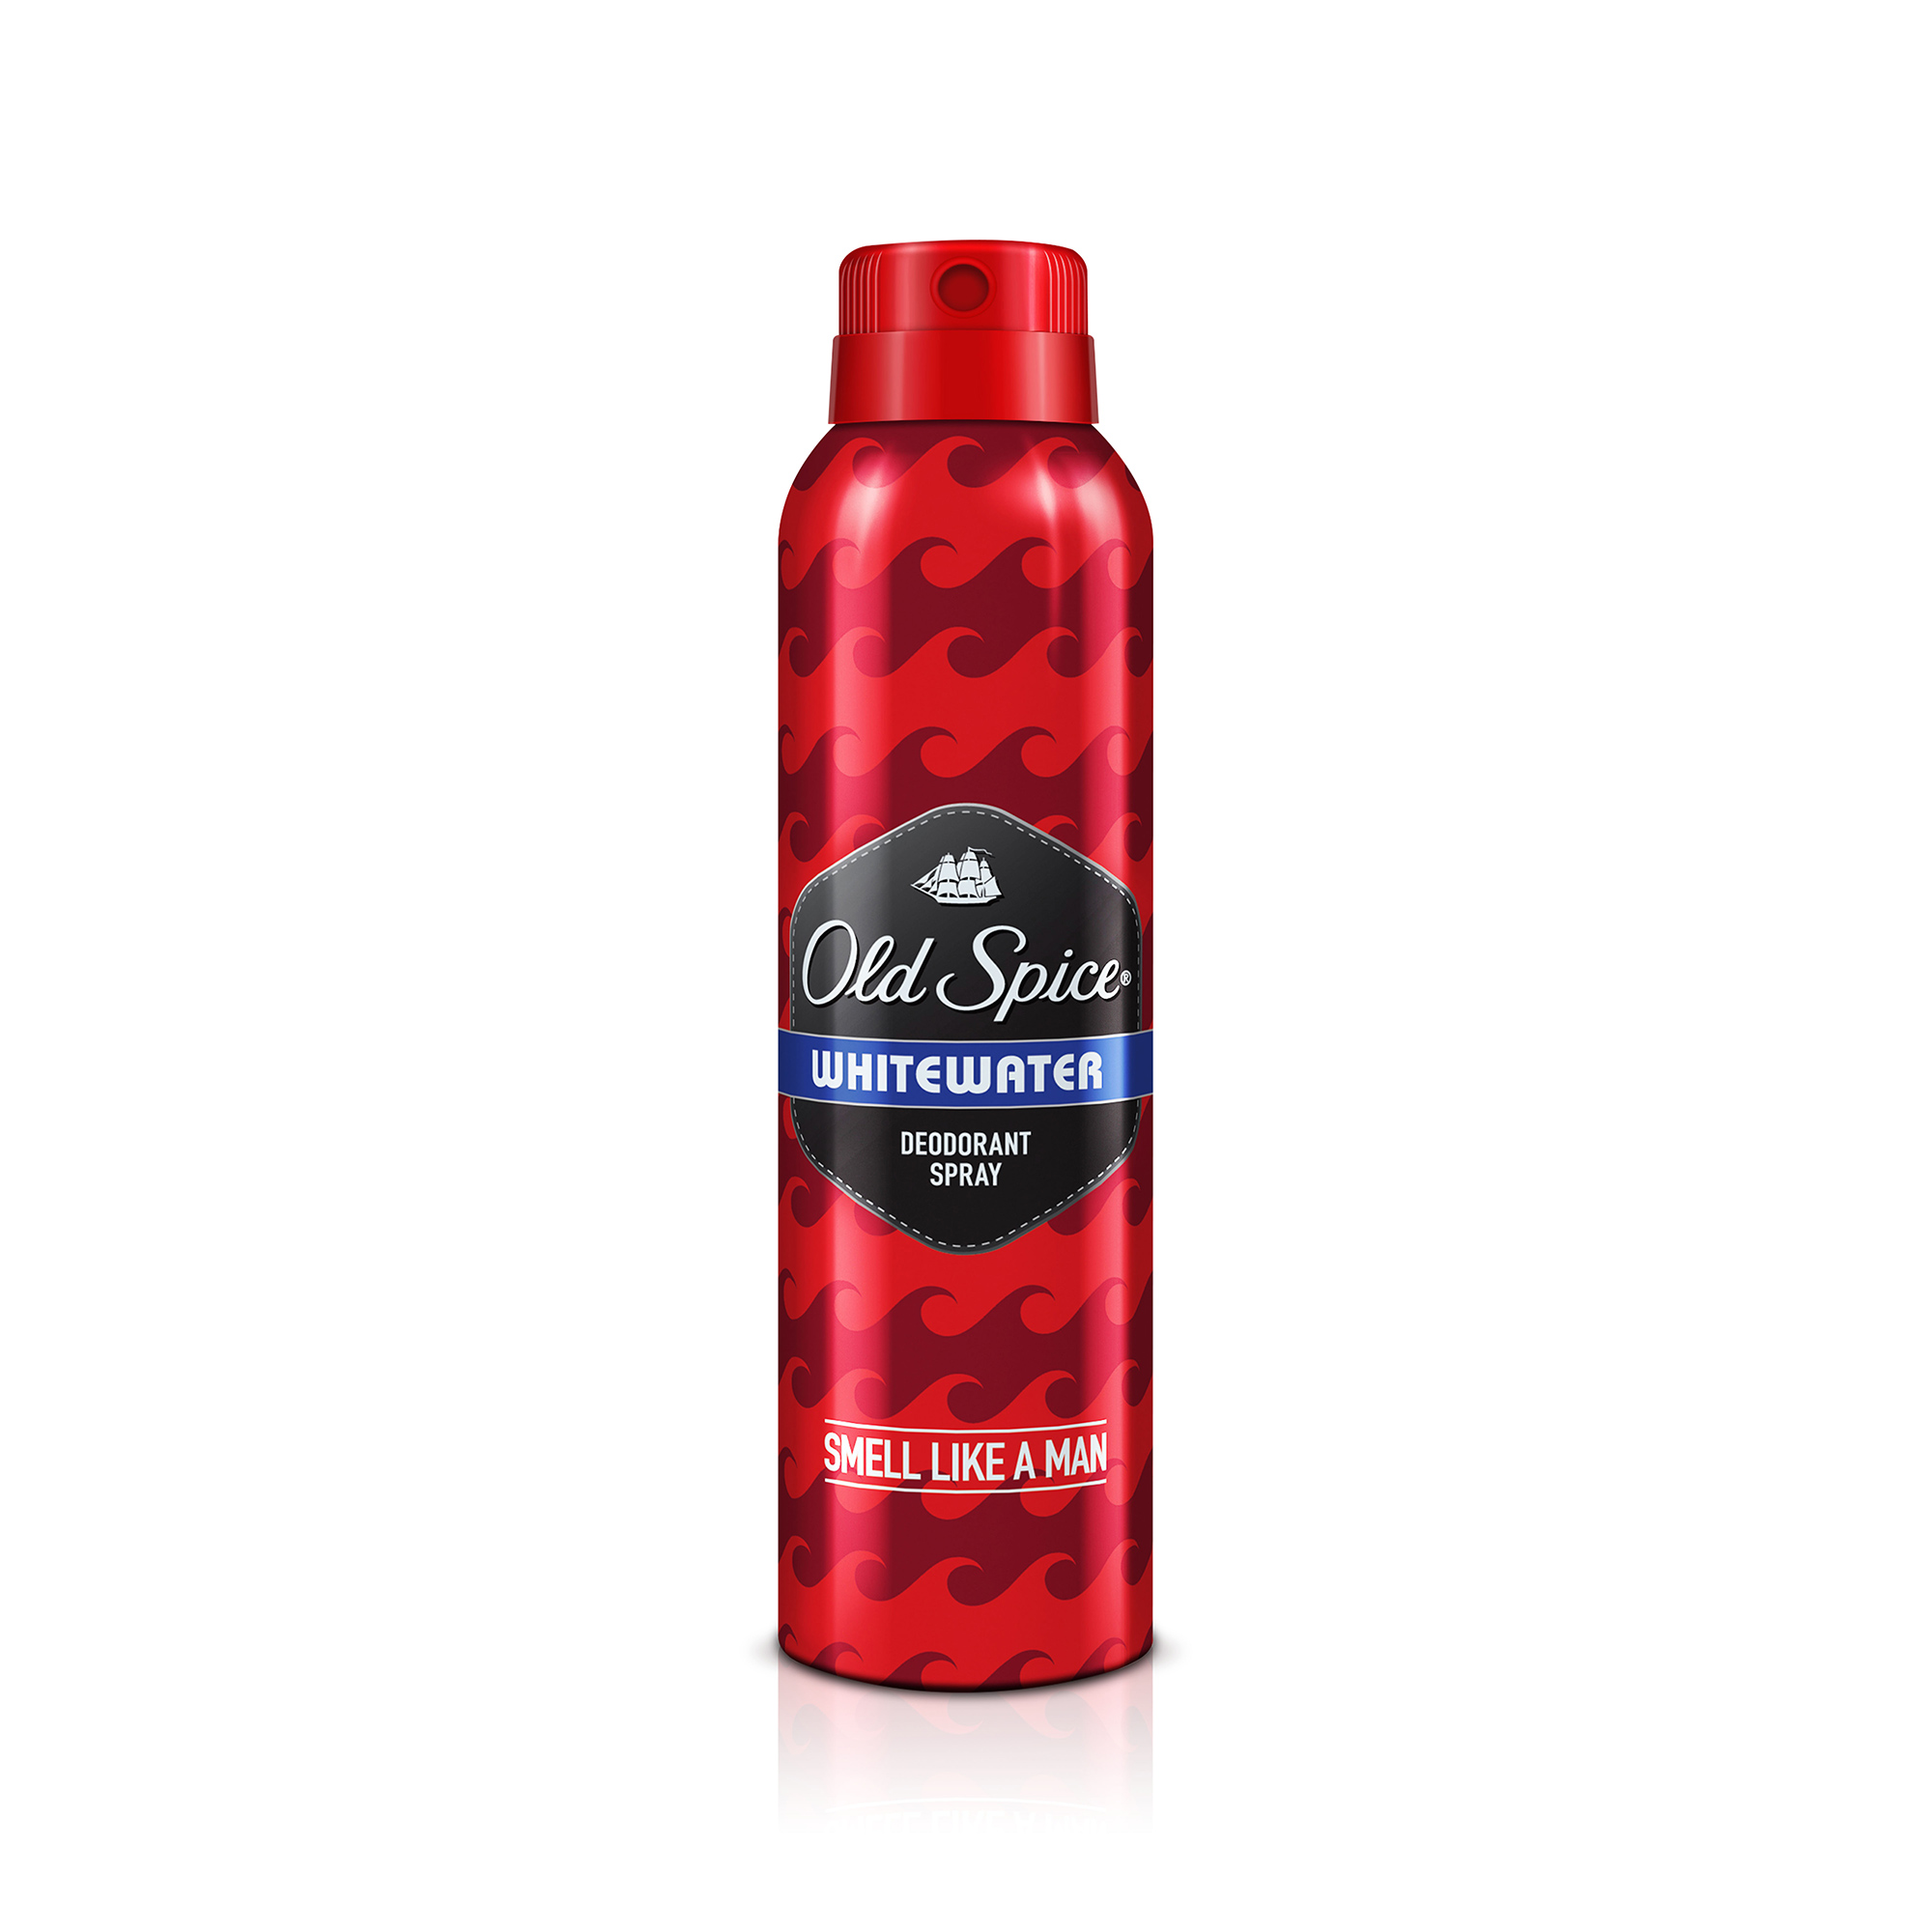 Old Spice Original Perfume Personal Grooming Birthday Gift Set for Men